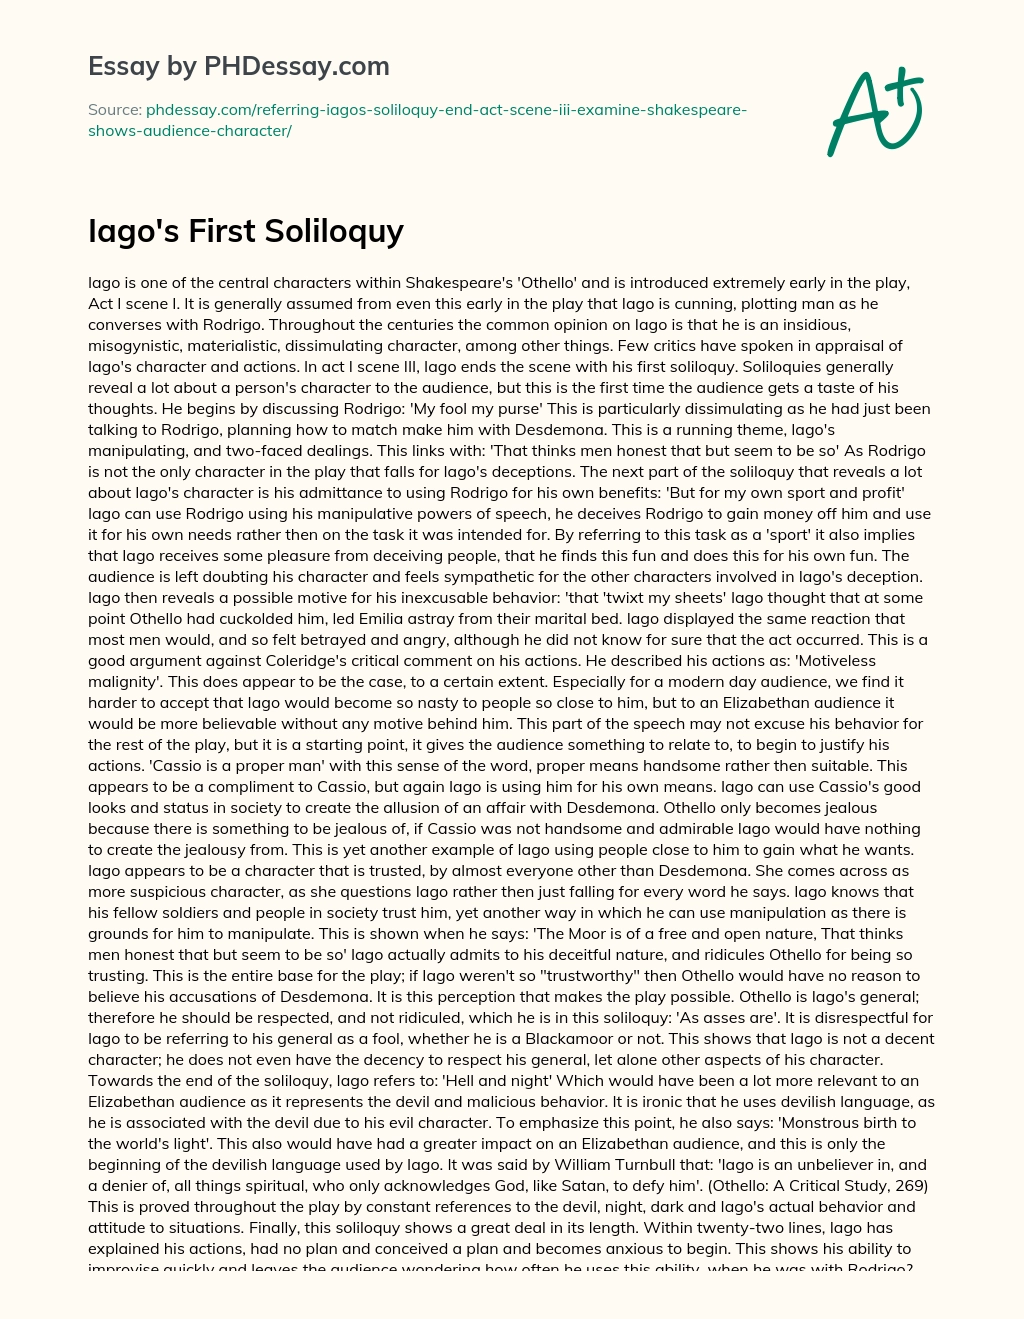 Iago’s First Soliloquy essay